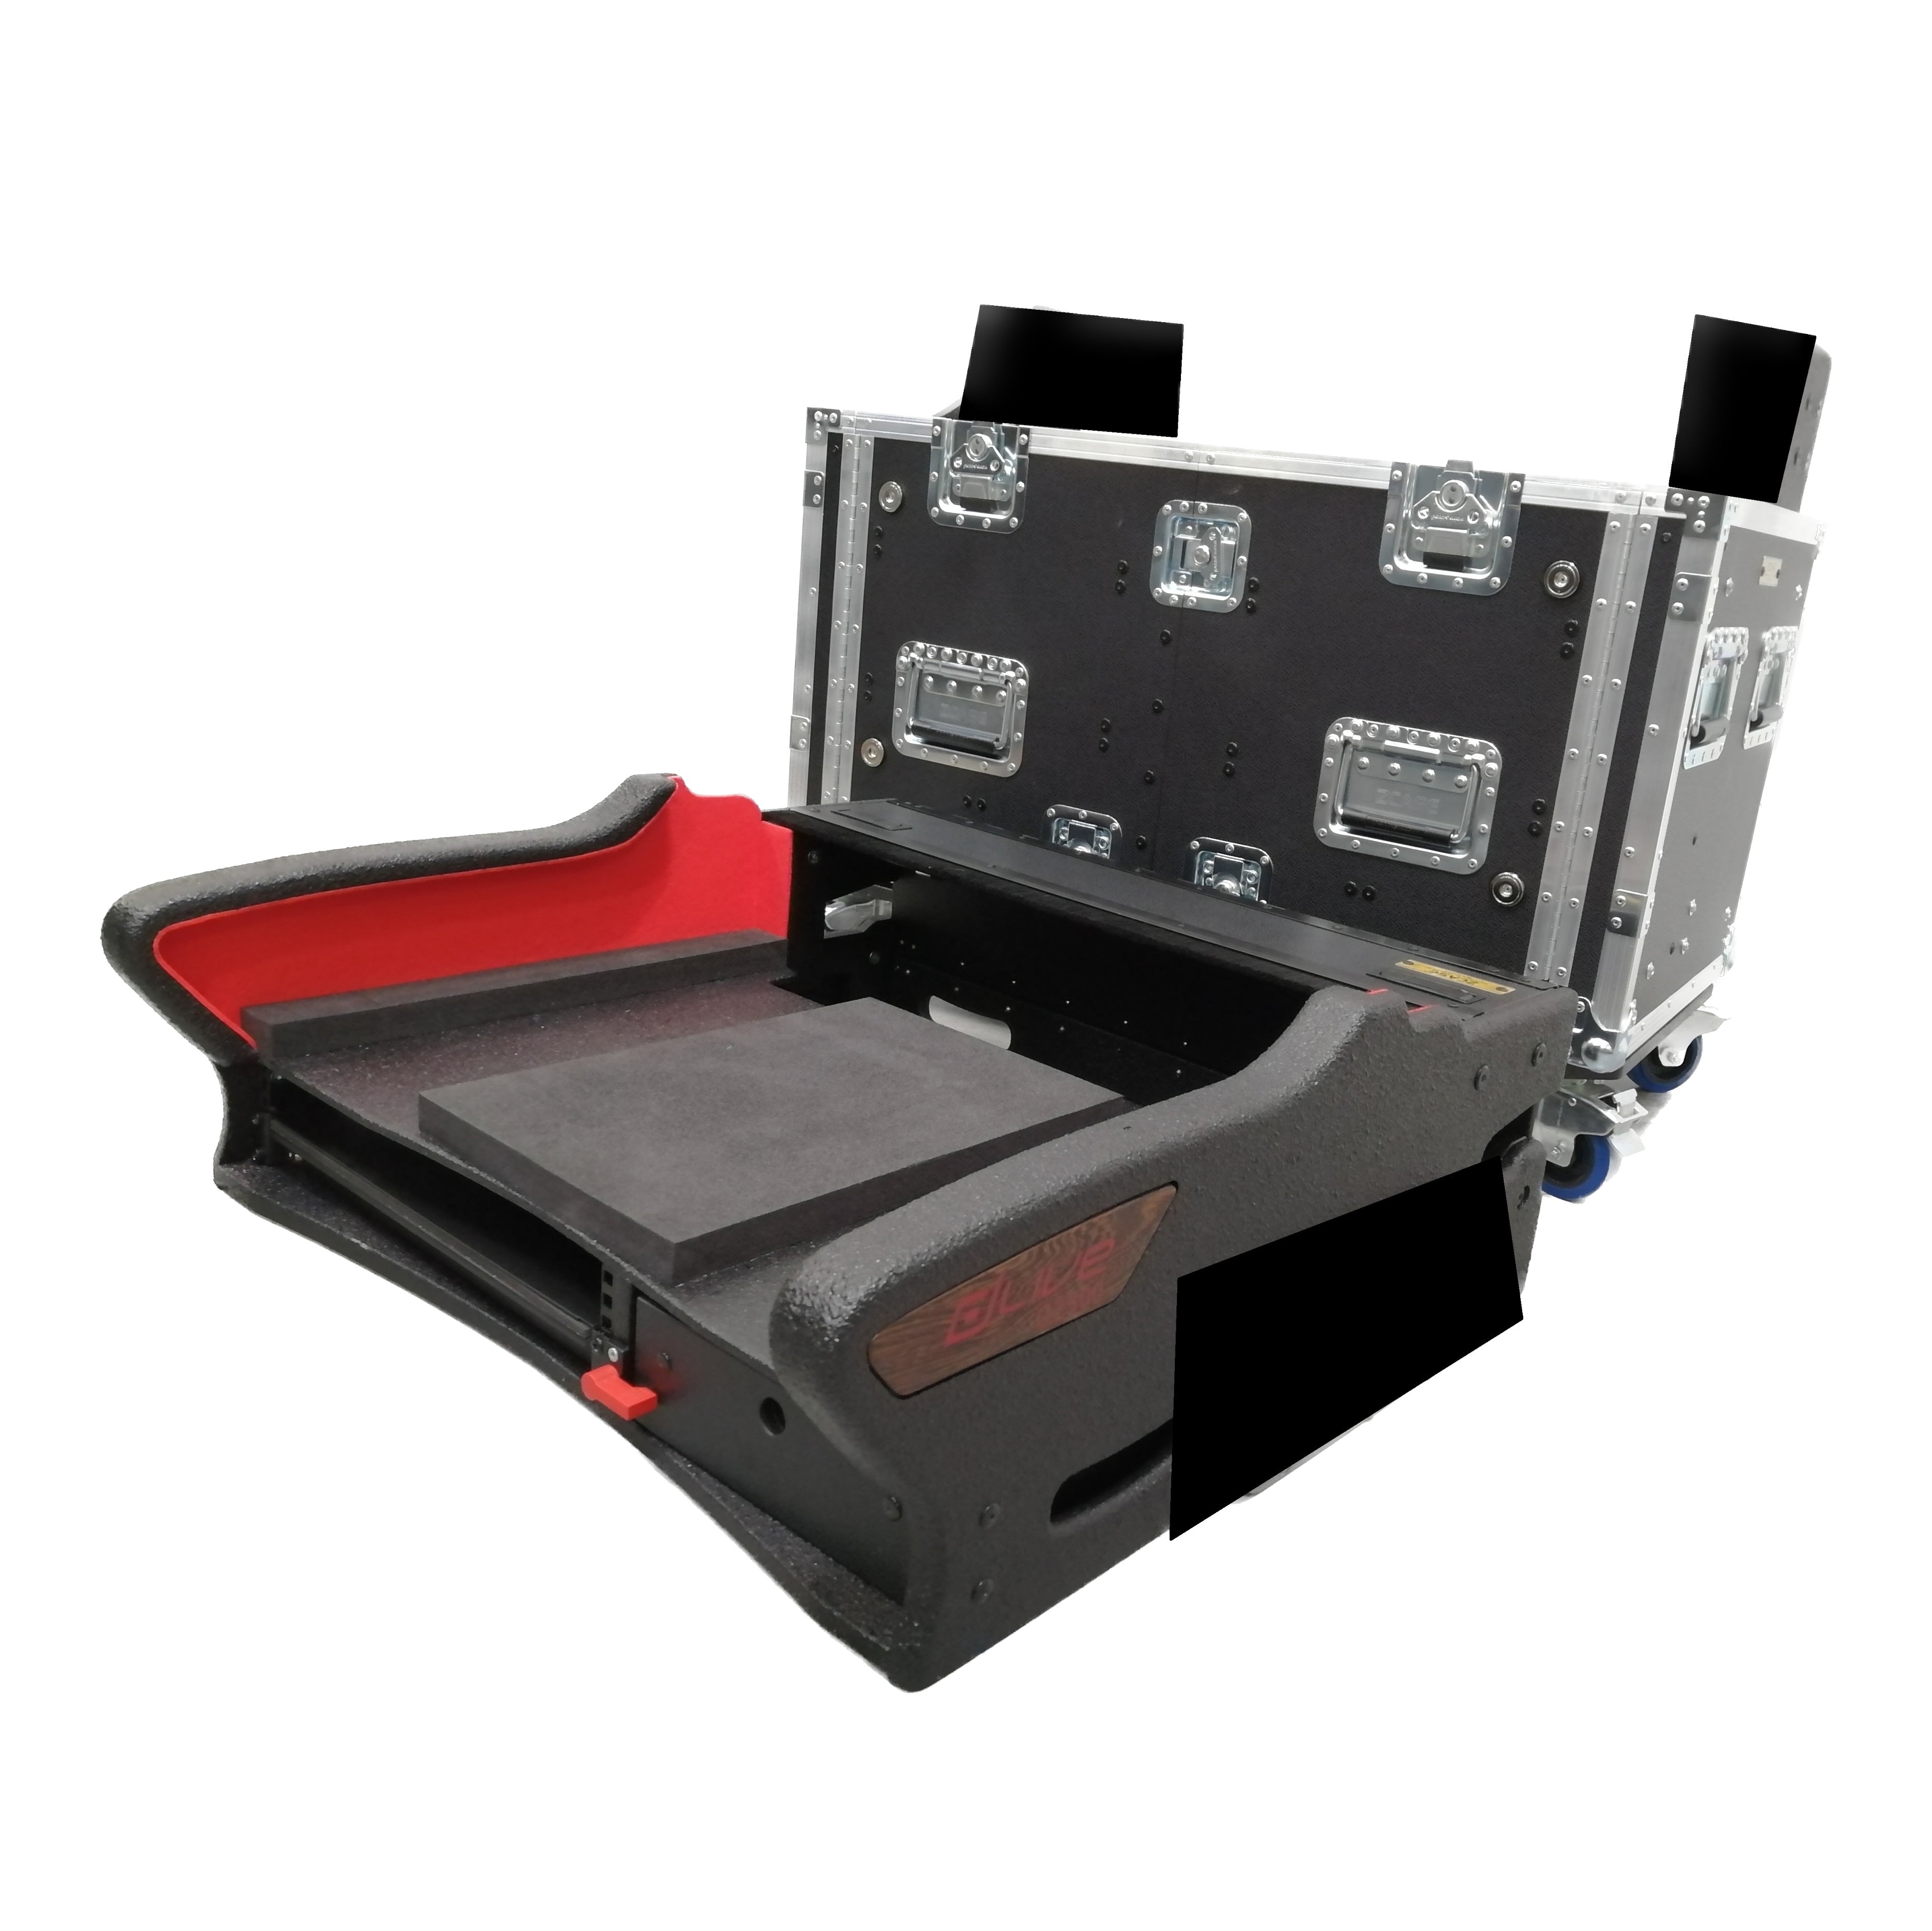 Pro X For Allen and Heath DLive C3500 Flip-Ready Hydraulic Console Easy Retracting Lifting Detachable Case by ZCASE XZF-AH-C3500 D